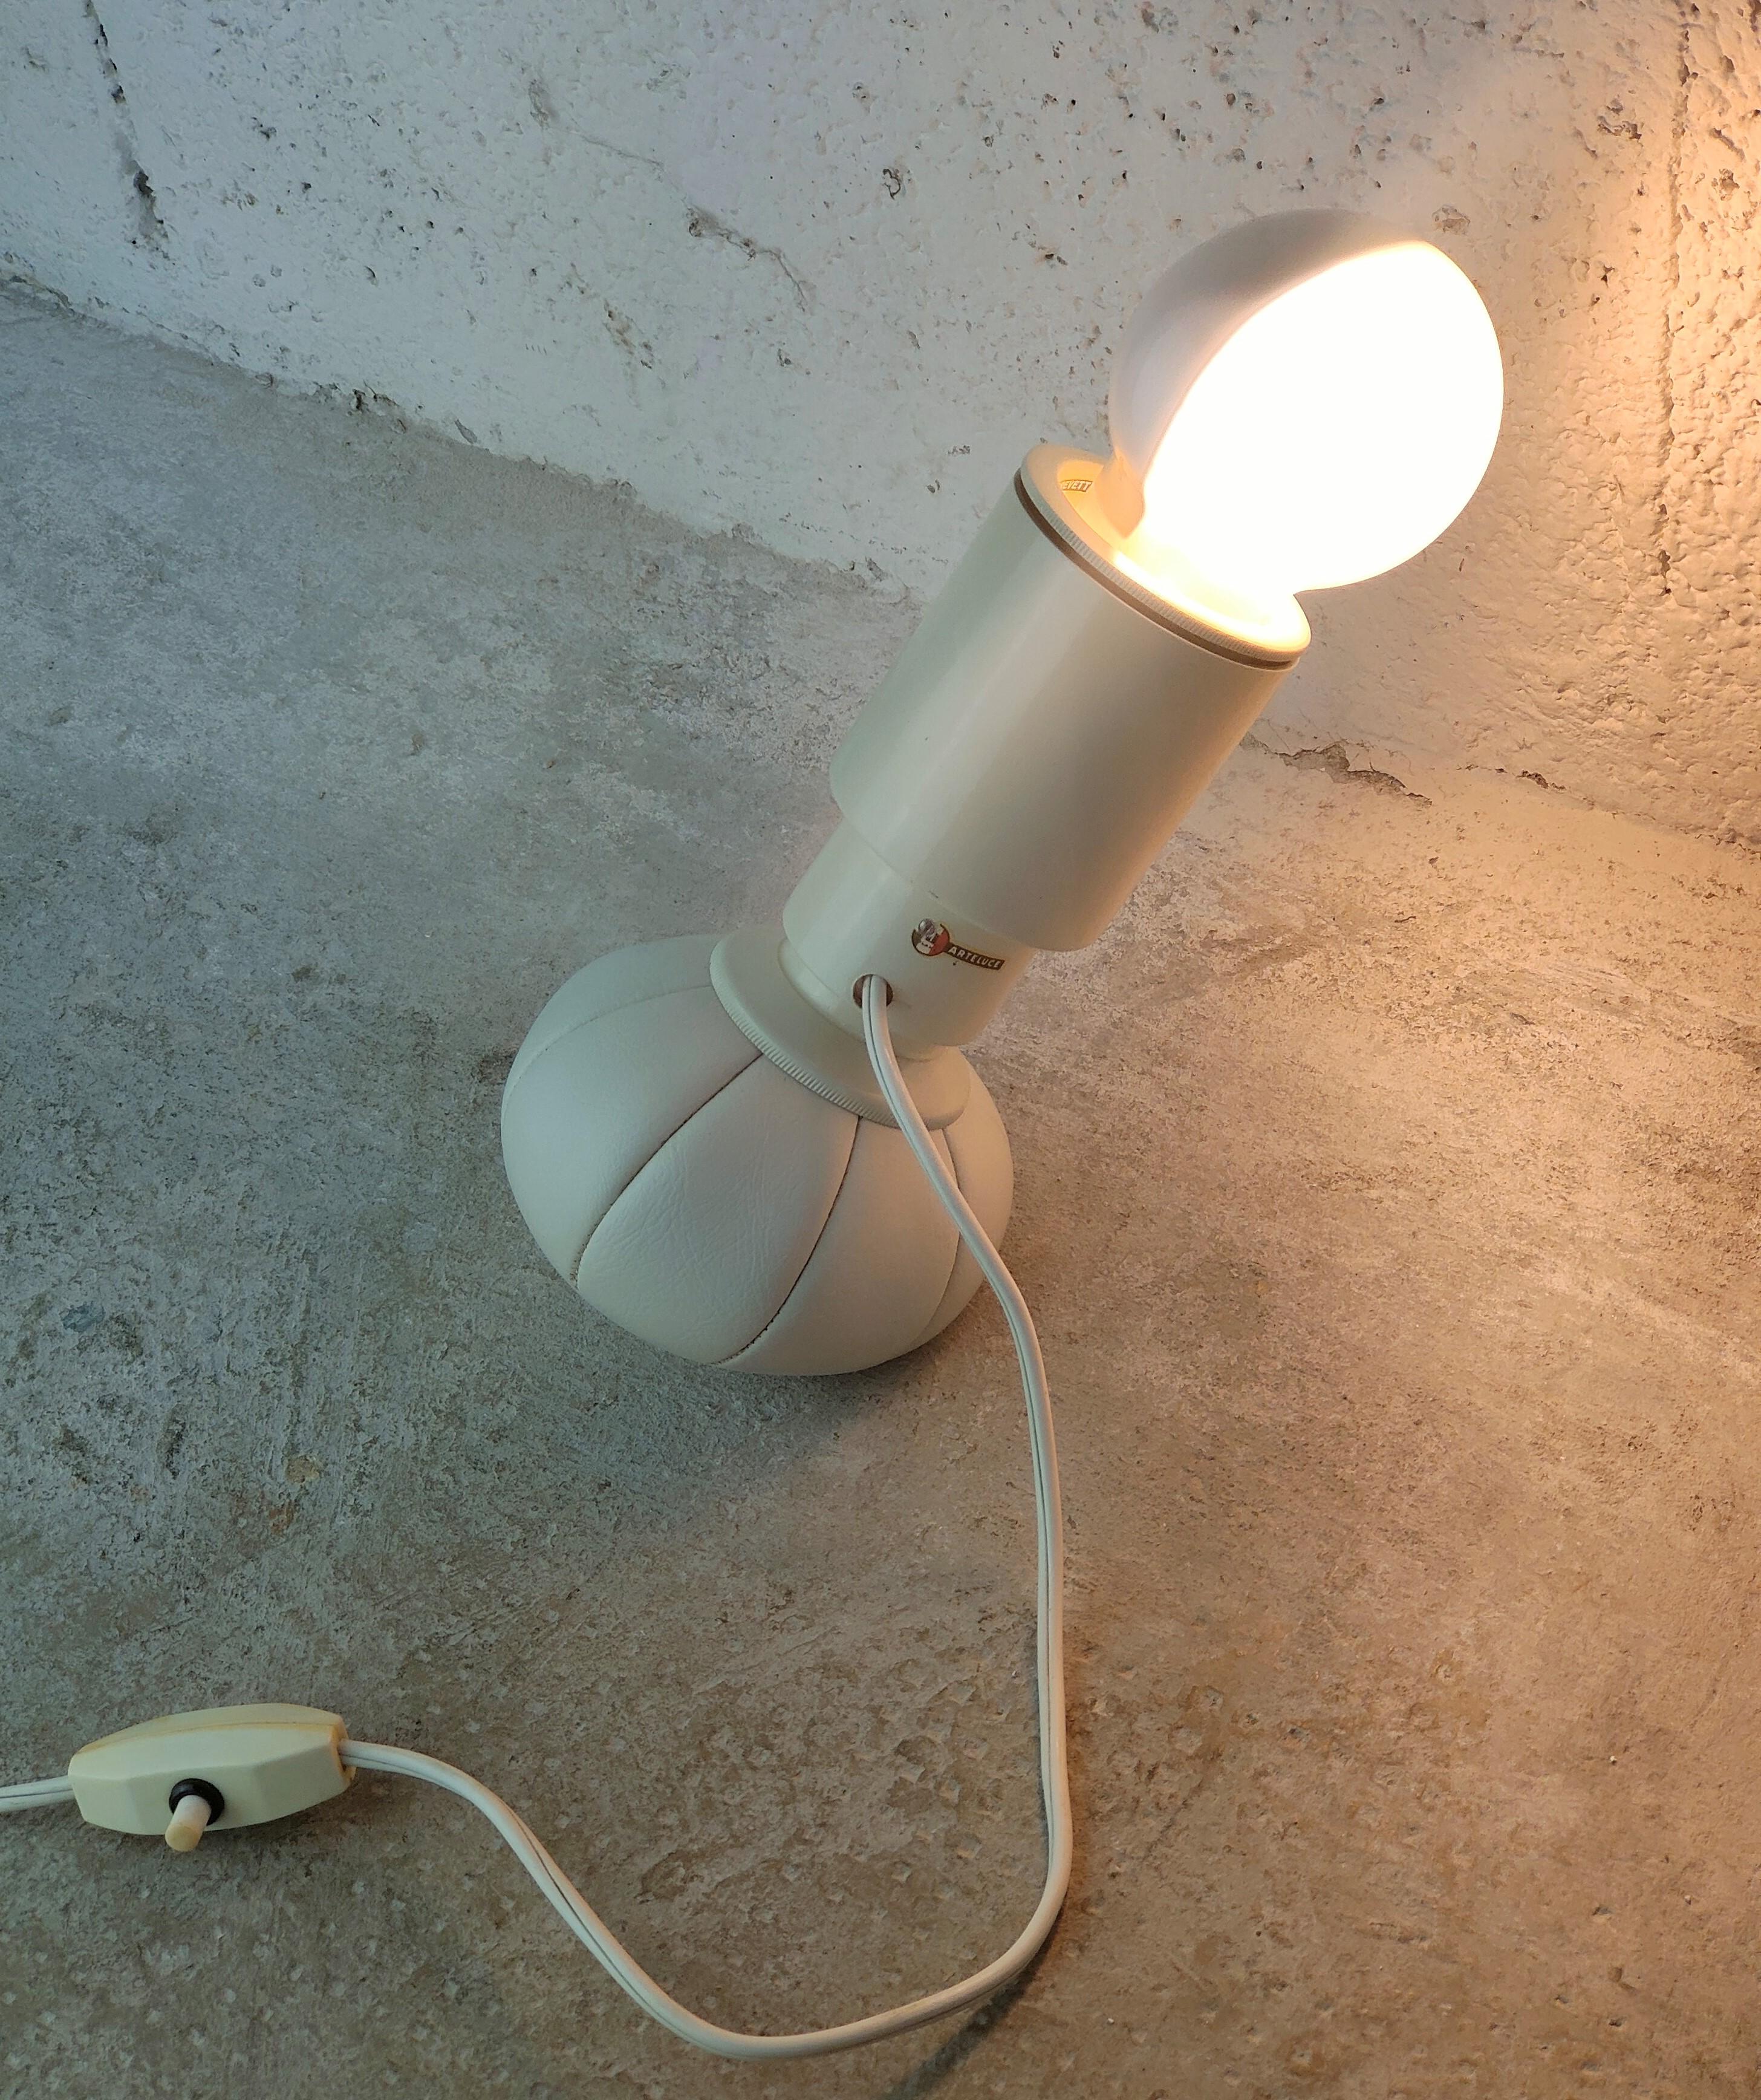 One of the first edition of the 600 c model designed by Gino Sarfatti and produced by Arteluce 1960s.
This exceptional lamp has weights at the bottom as if made with bean bags. 
The weights that resemble a ball, keep the lights in their place, but